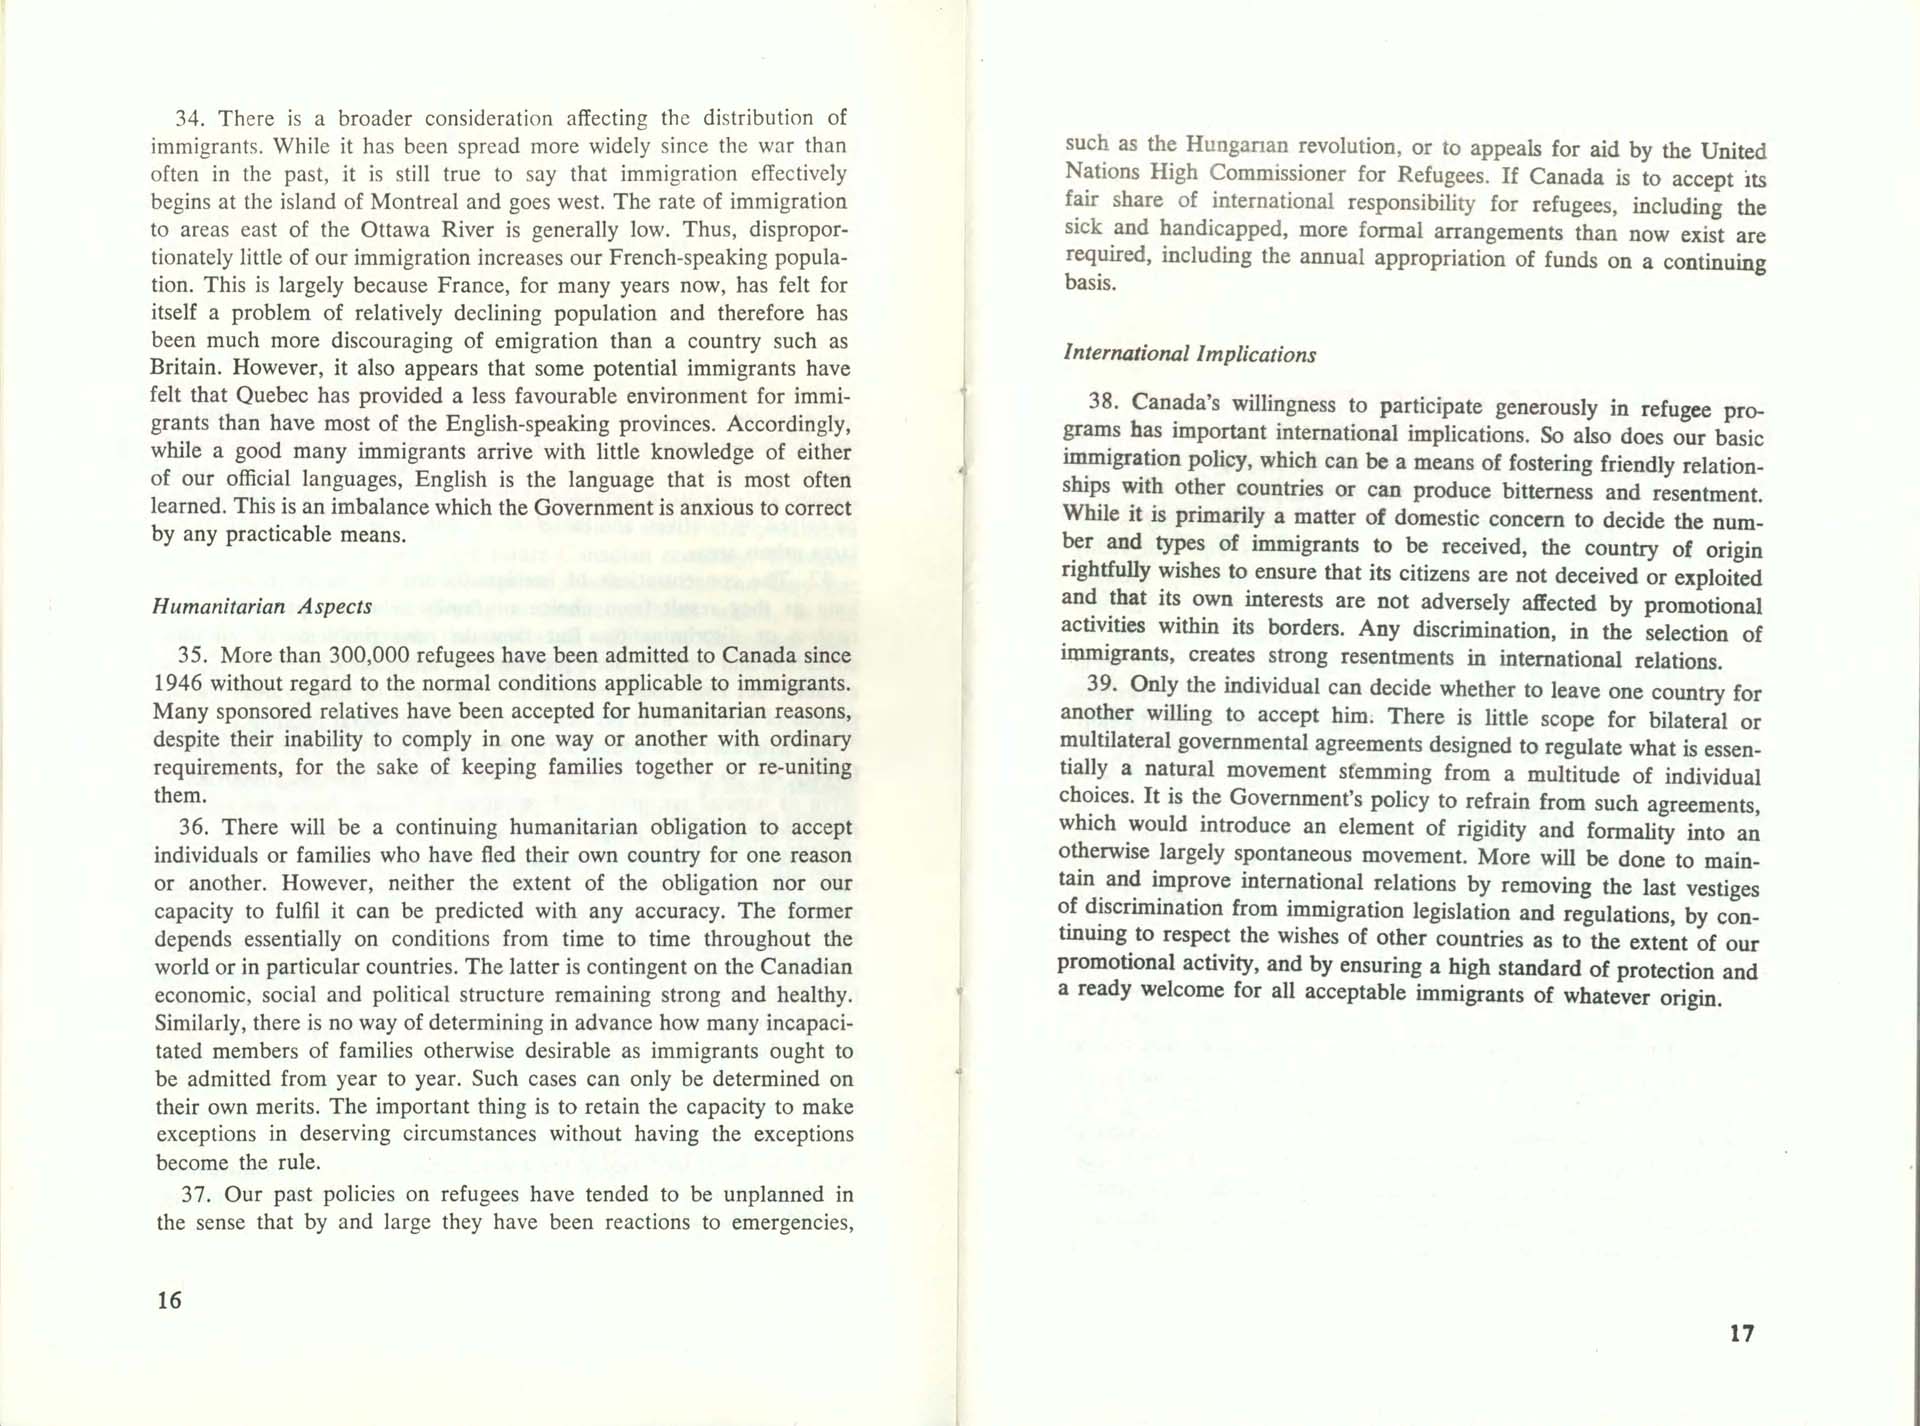 Page 16, 17 White Paper on Immigration, 1966